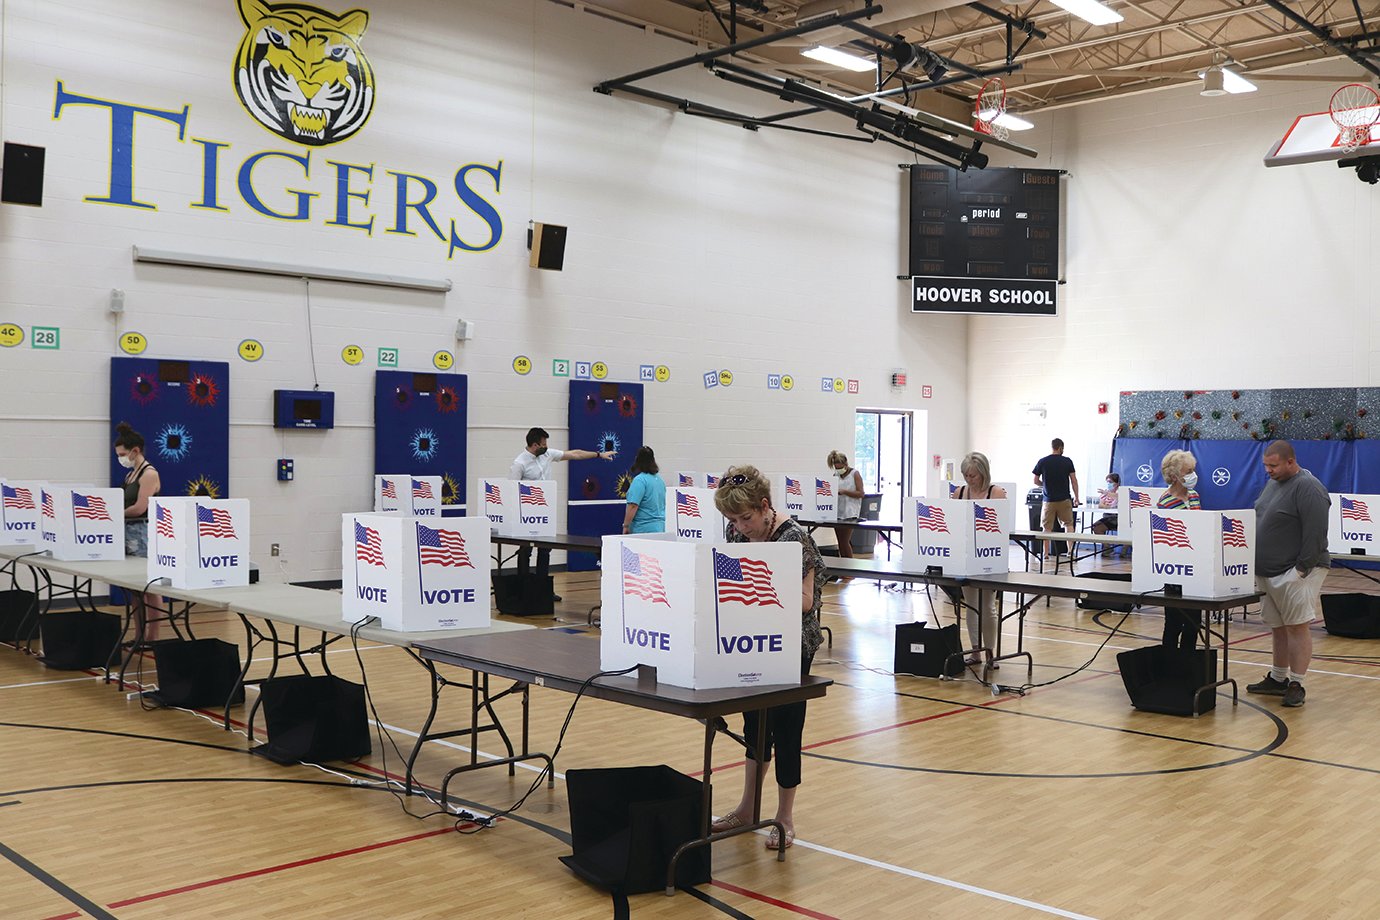 The polling center at Hoover Elementary saw nearly 800 voters by 3 p.m. on Tuesday during Indiana's Primary Election.